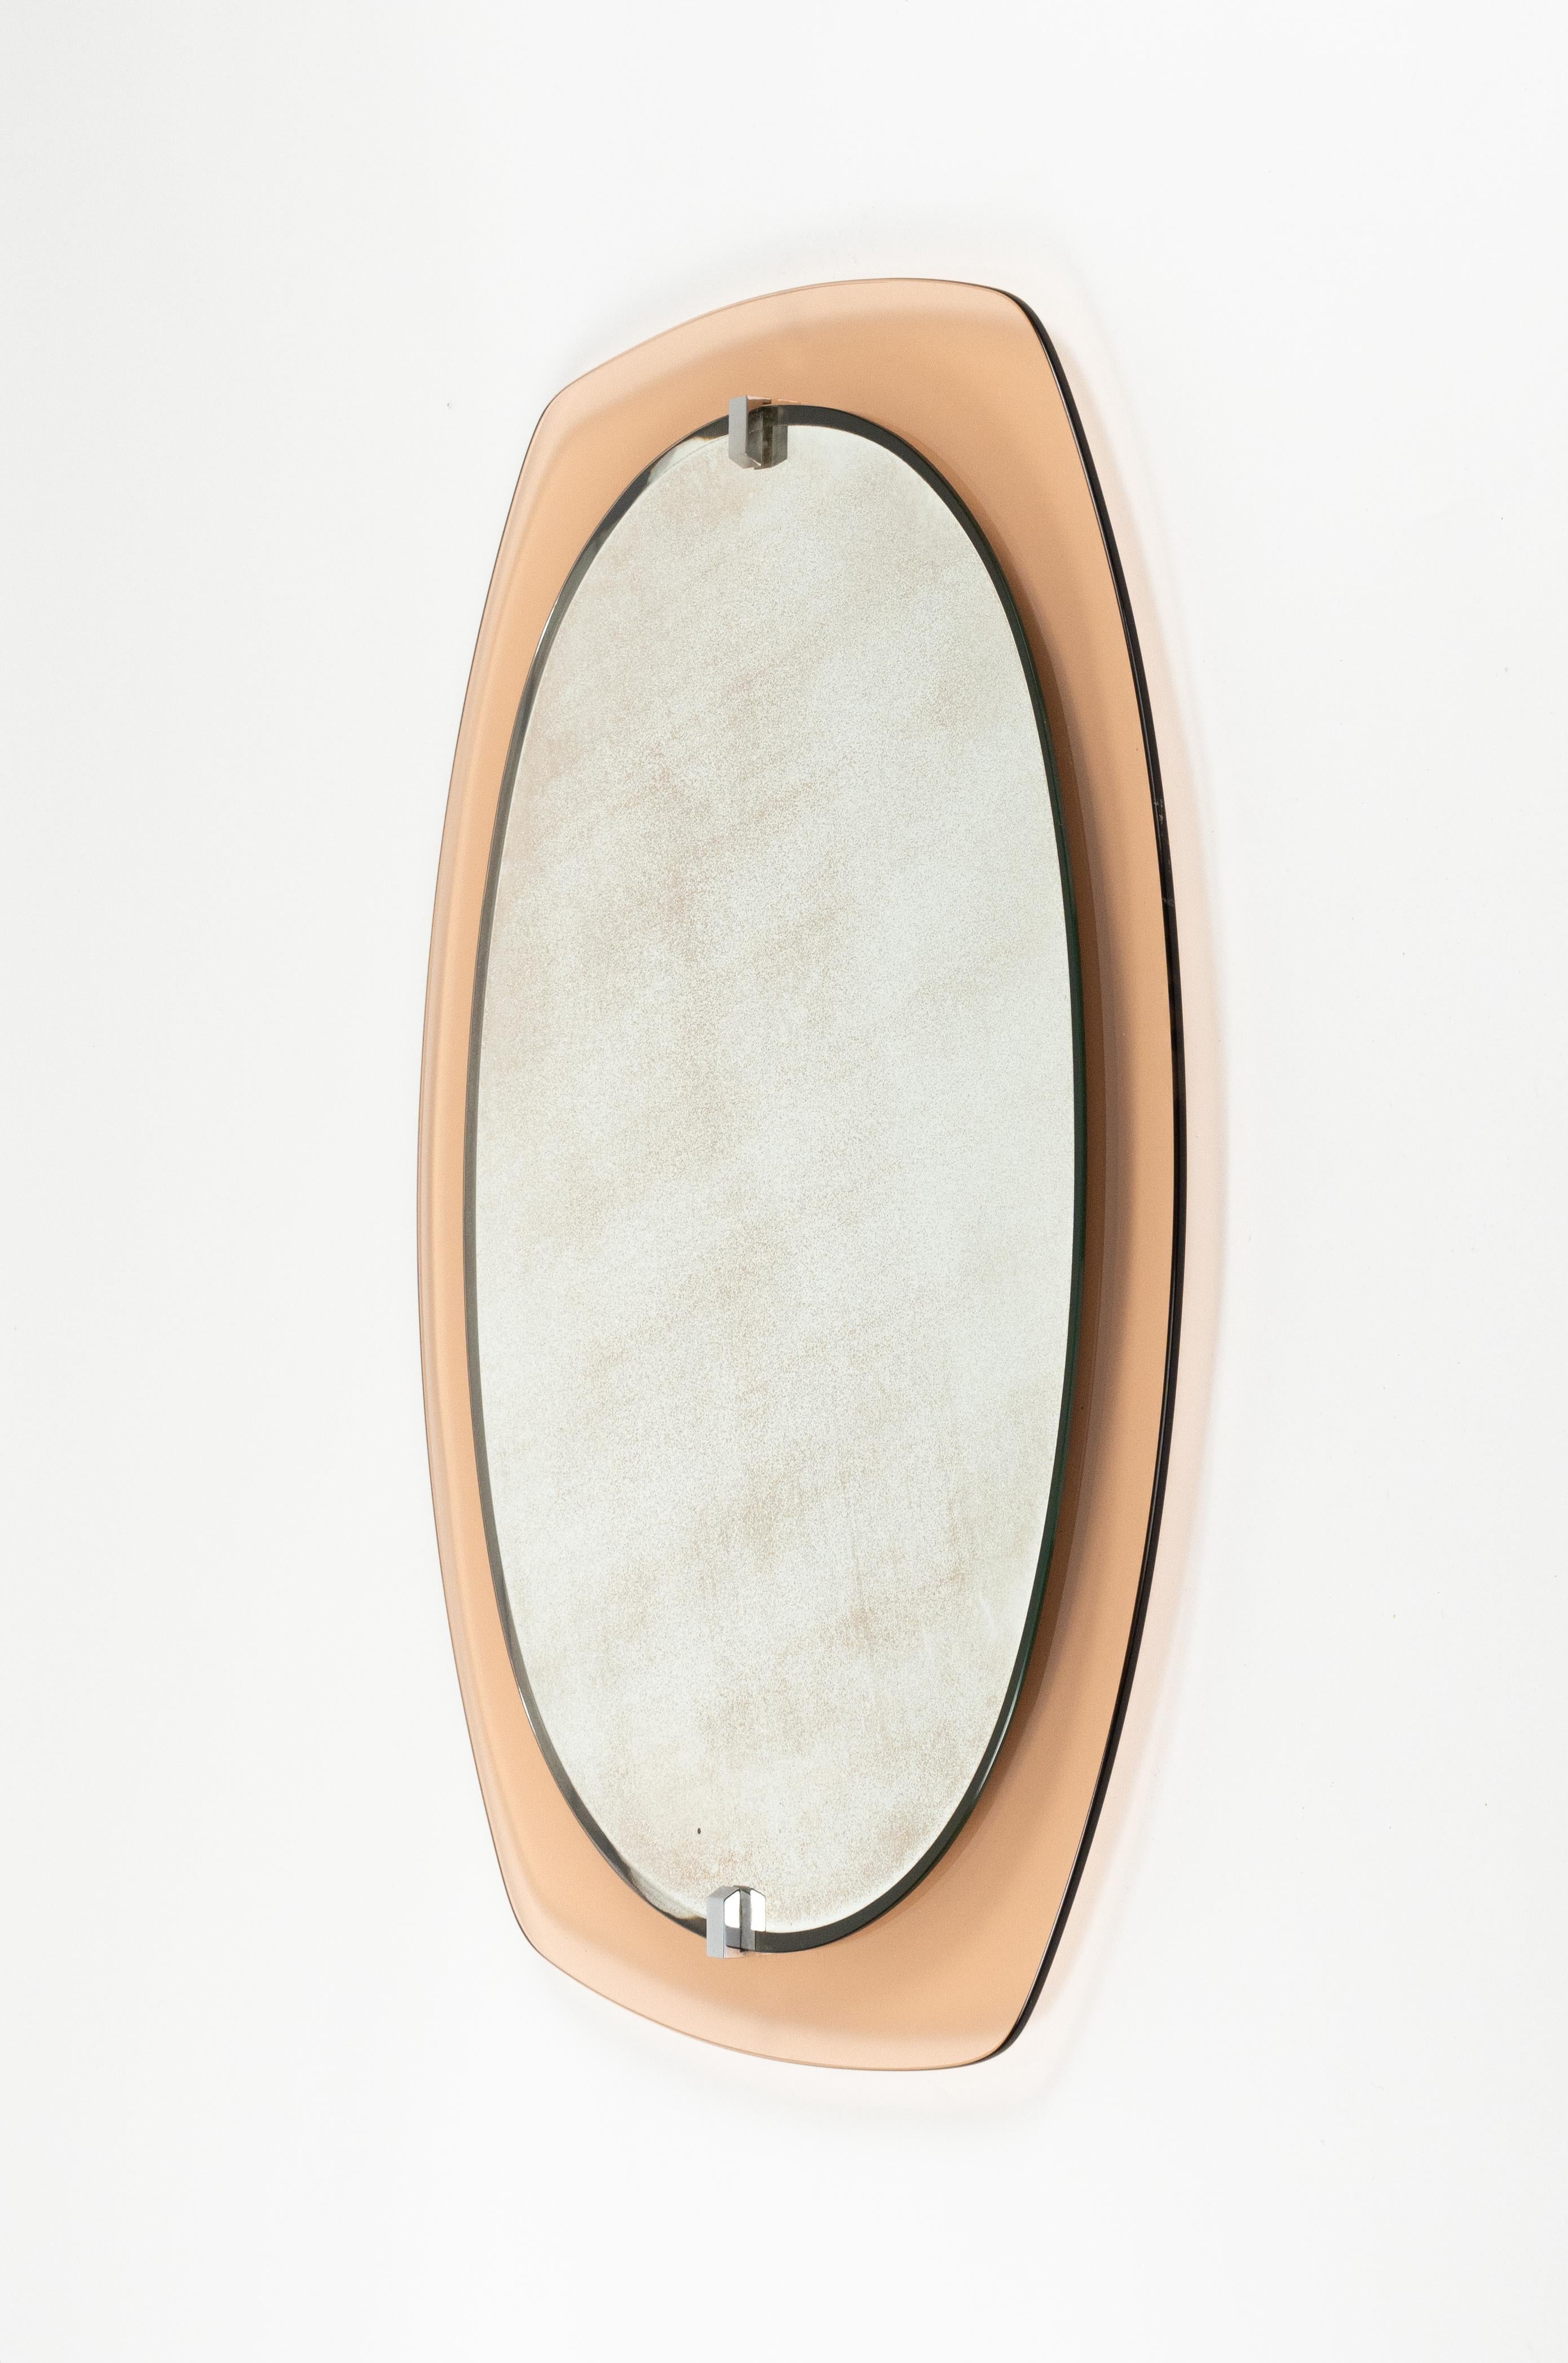 Midcentury Glass Pink Oval Wall Mirror by Veca, Italy 1970s For Sale 1